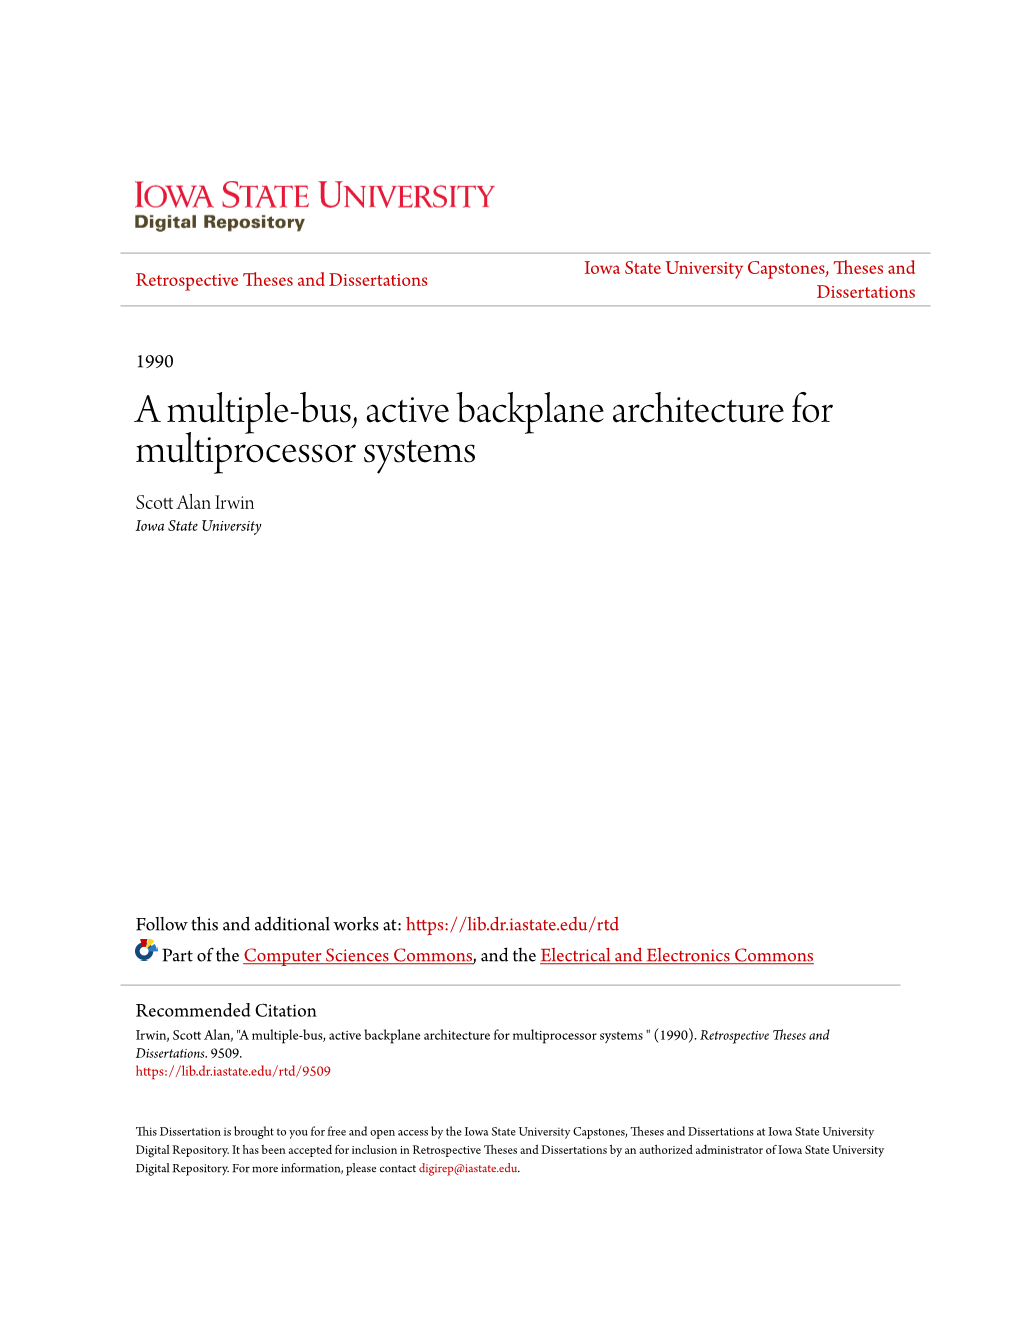 A Multiple-Bus, Active Backplane Architecture for Multiprocessor Systems Scott Alan Irwin Iowa State University